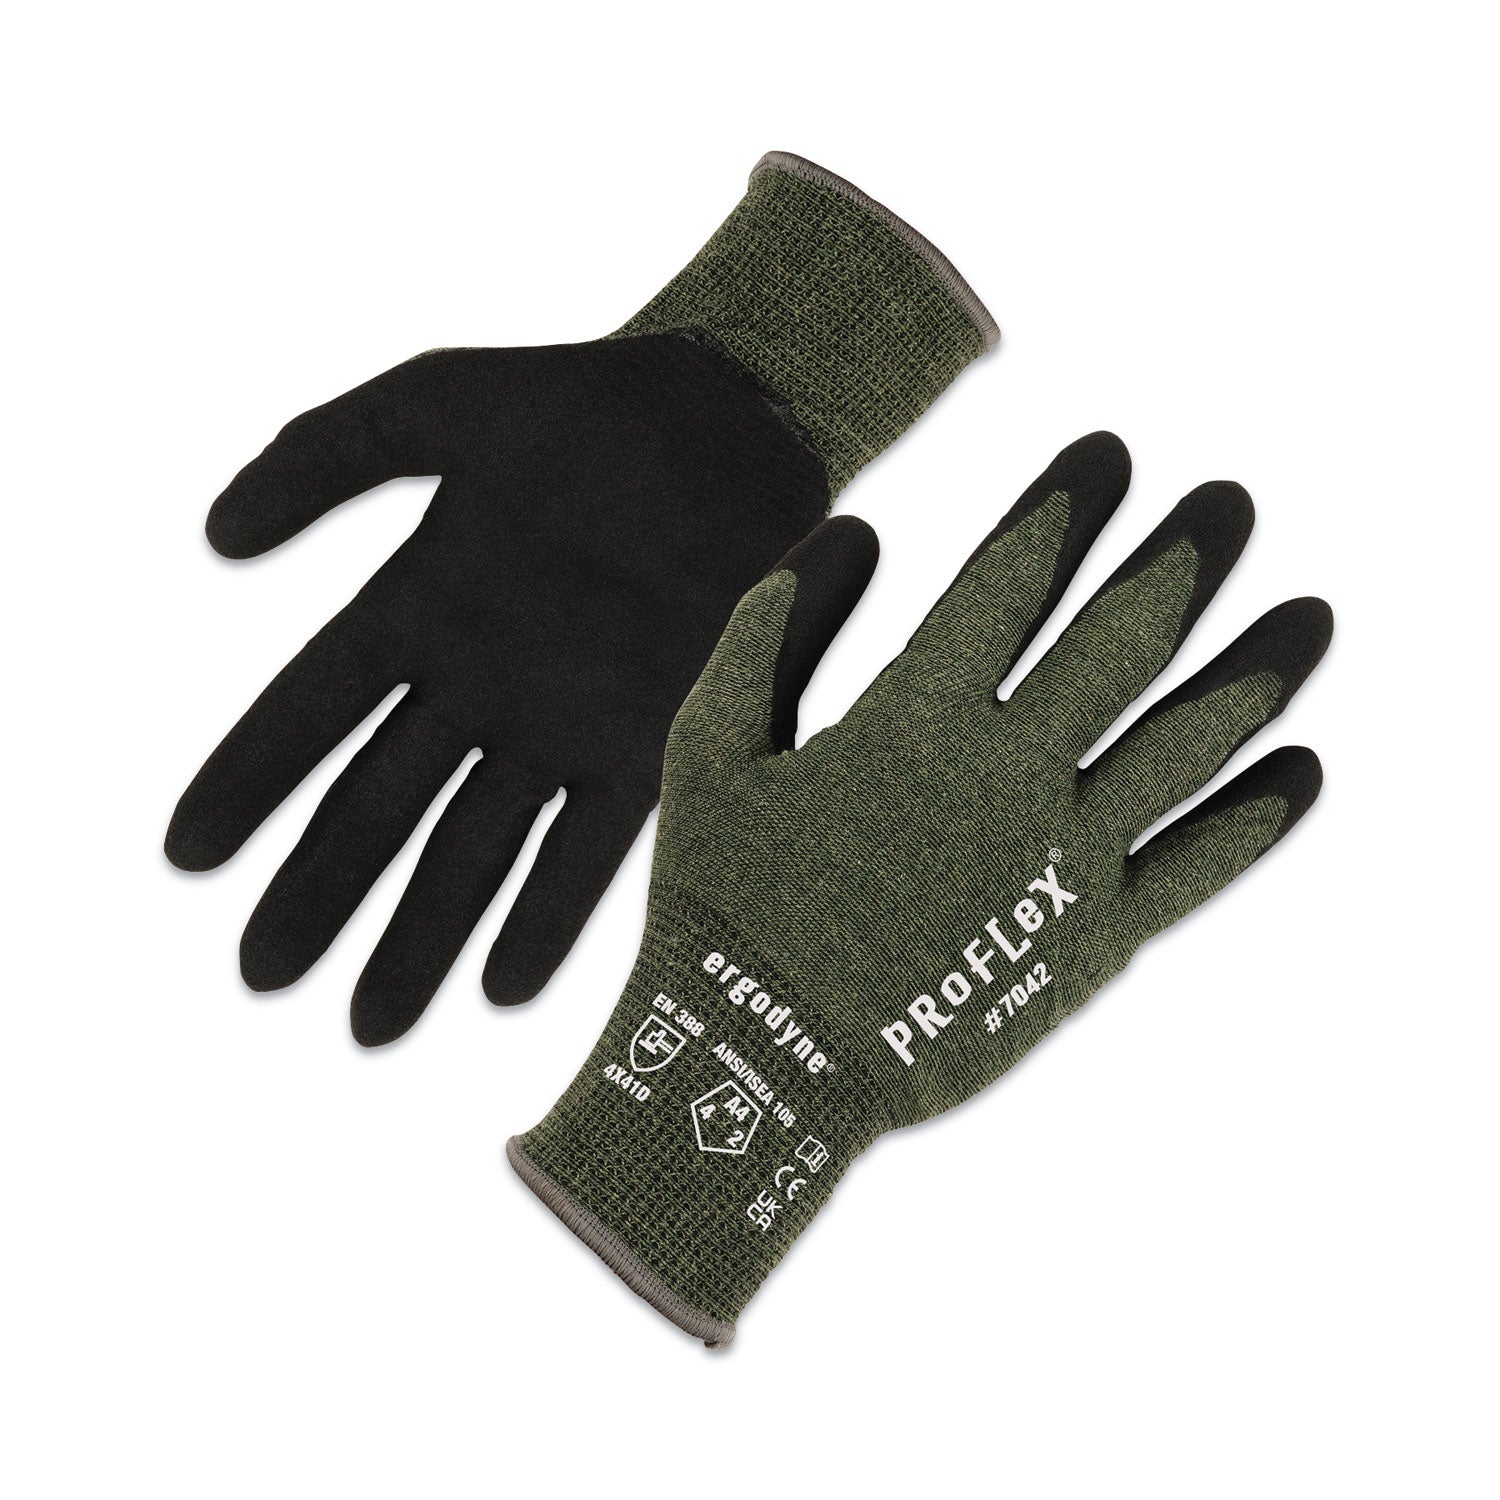 proflex-7042-ansi-a4-nitrile-coated-cr-gloves-green-medium-12-pairs-pack-ships-in-1-3-business-days_ego10333 - 1